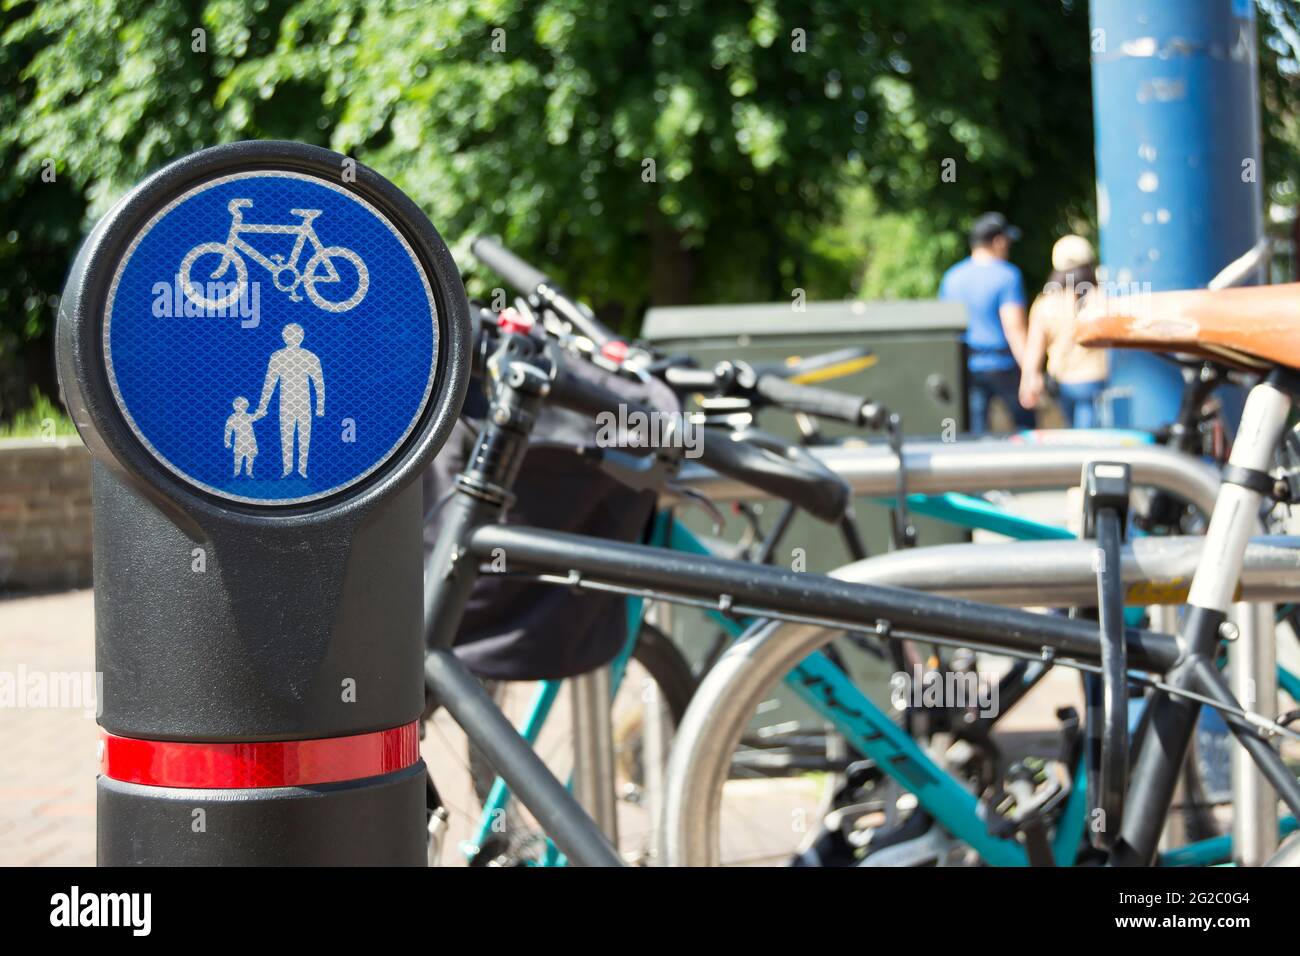 shared space sign for pedestrians and cyclists alongside parked bikes in kingston upon thames, surrey, england Stock Photo